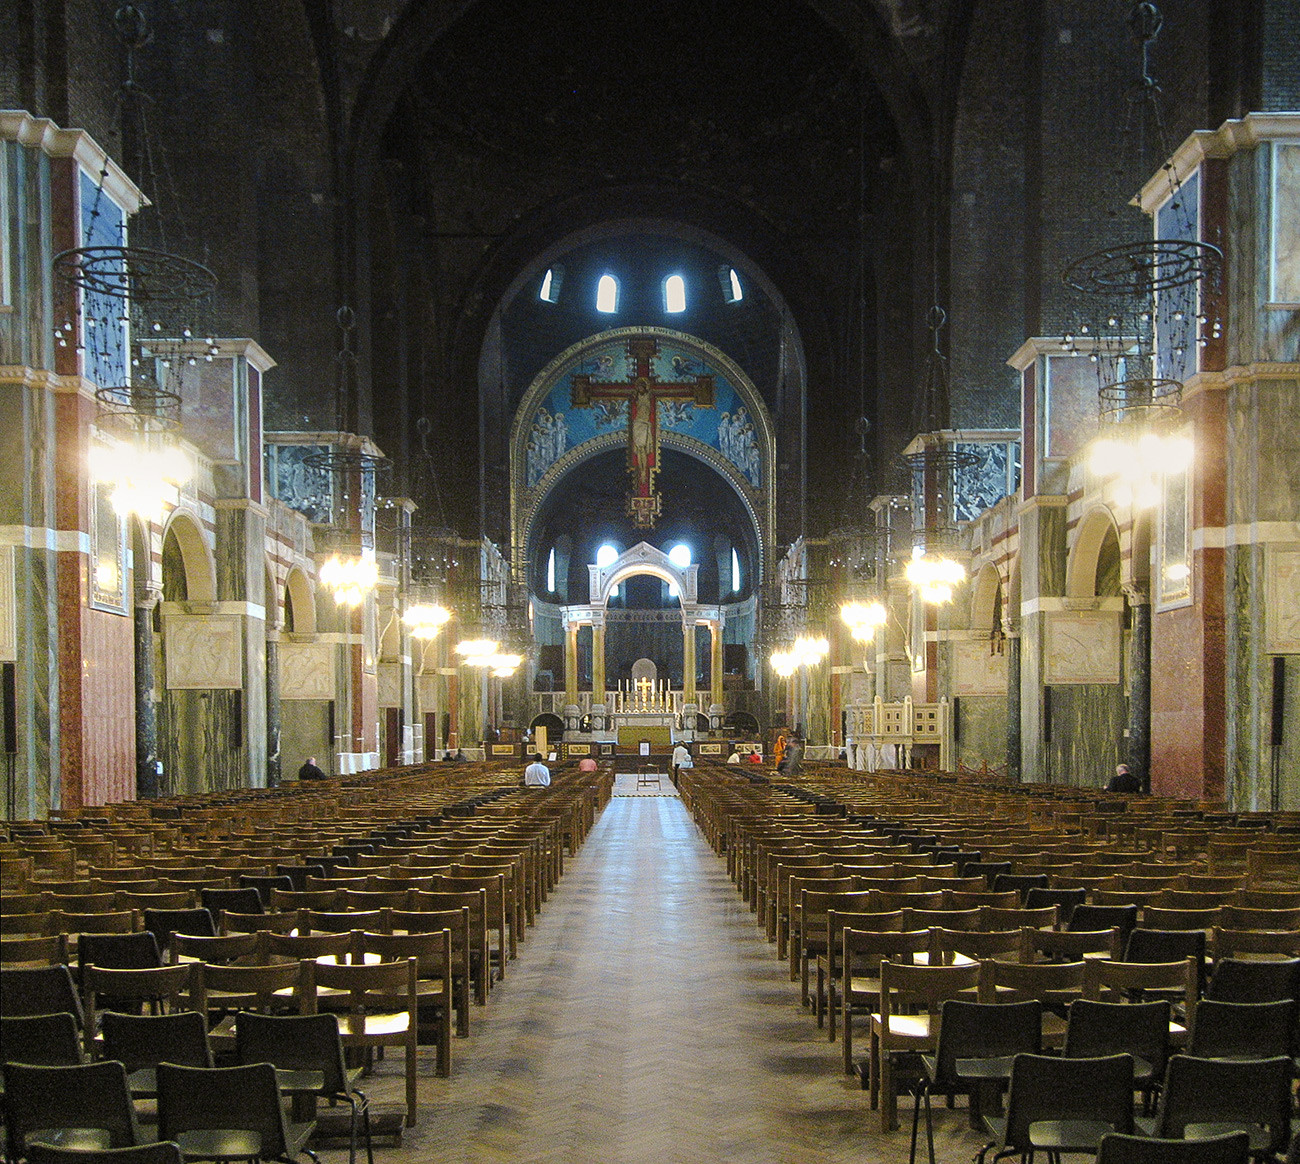 The scene was actually filmed in the Catholic Westminster Cathedral in London (not to be confused with Westminster Abbey)